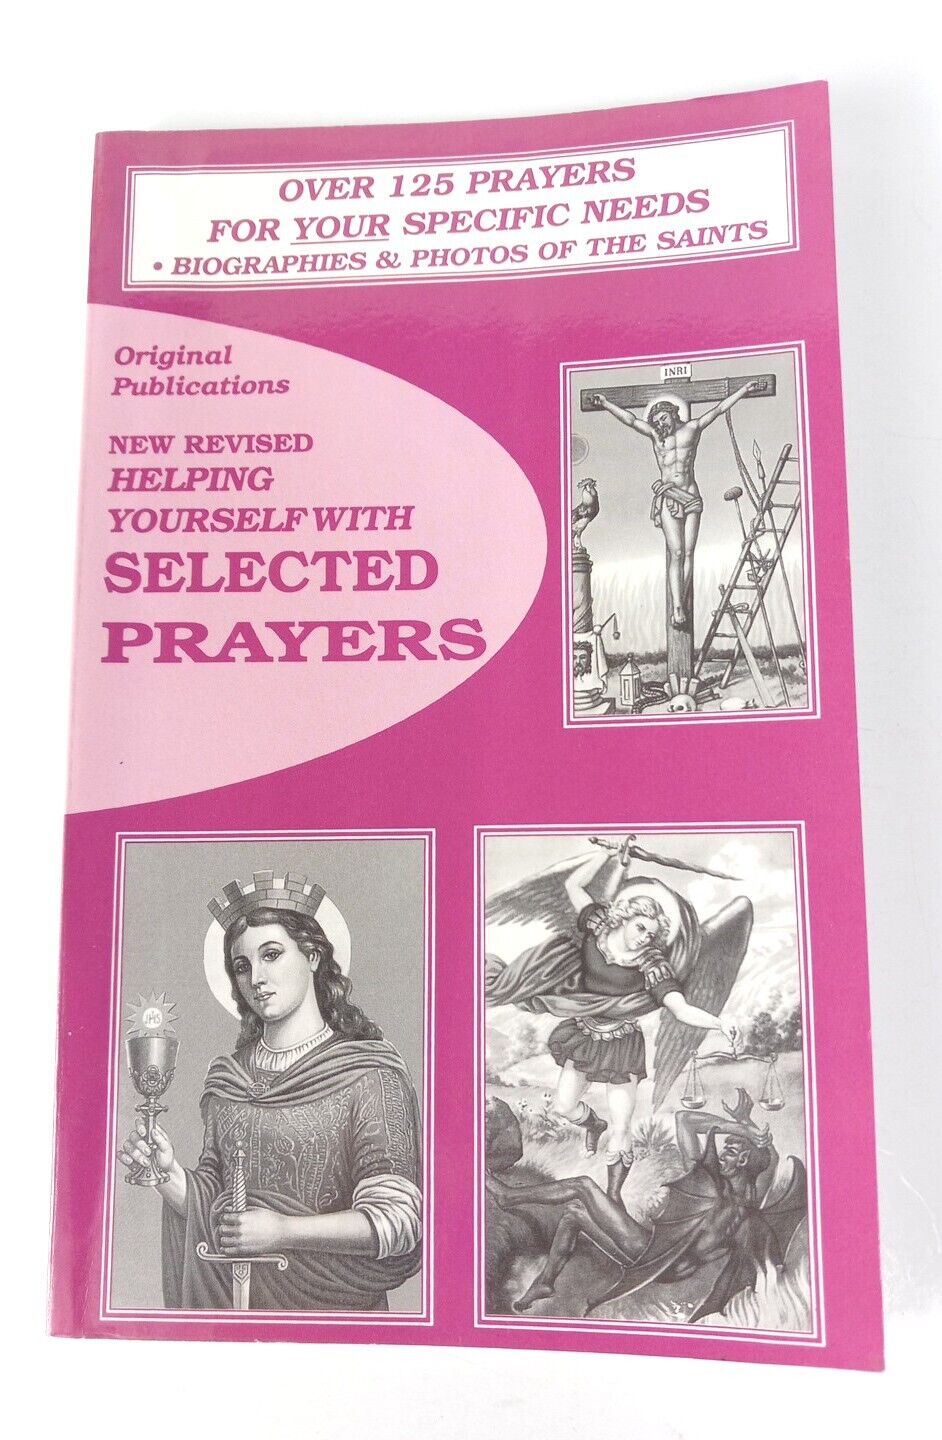 Helping Yourself With Selected Prayers 1995 Book Various Religious Beliefs VTG